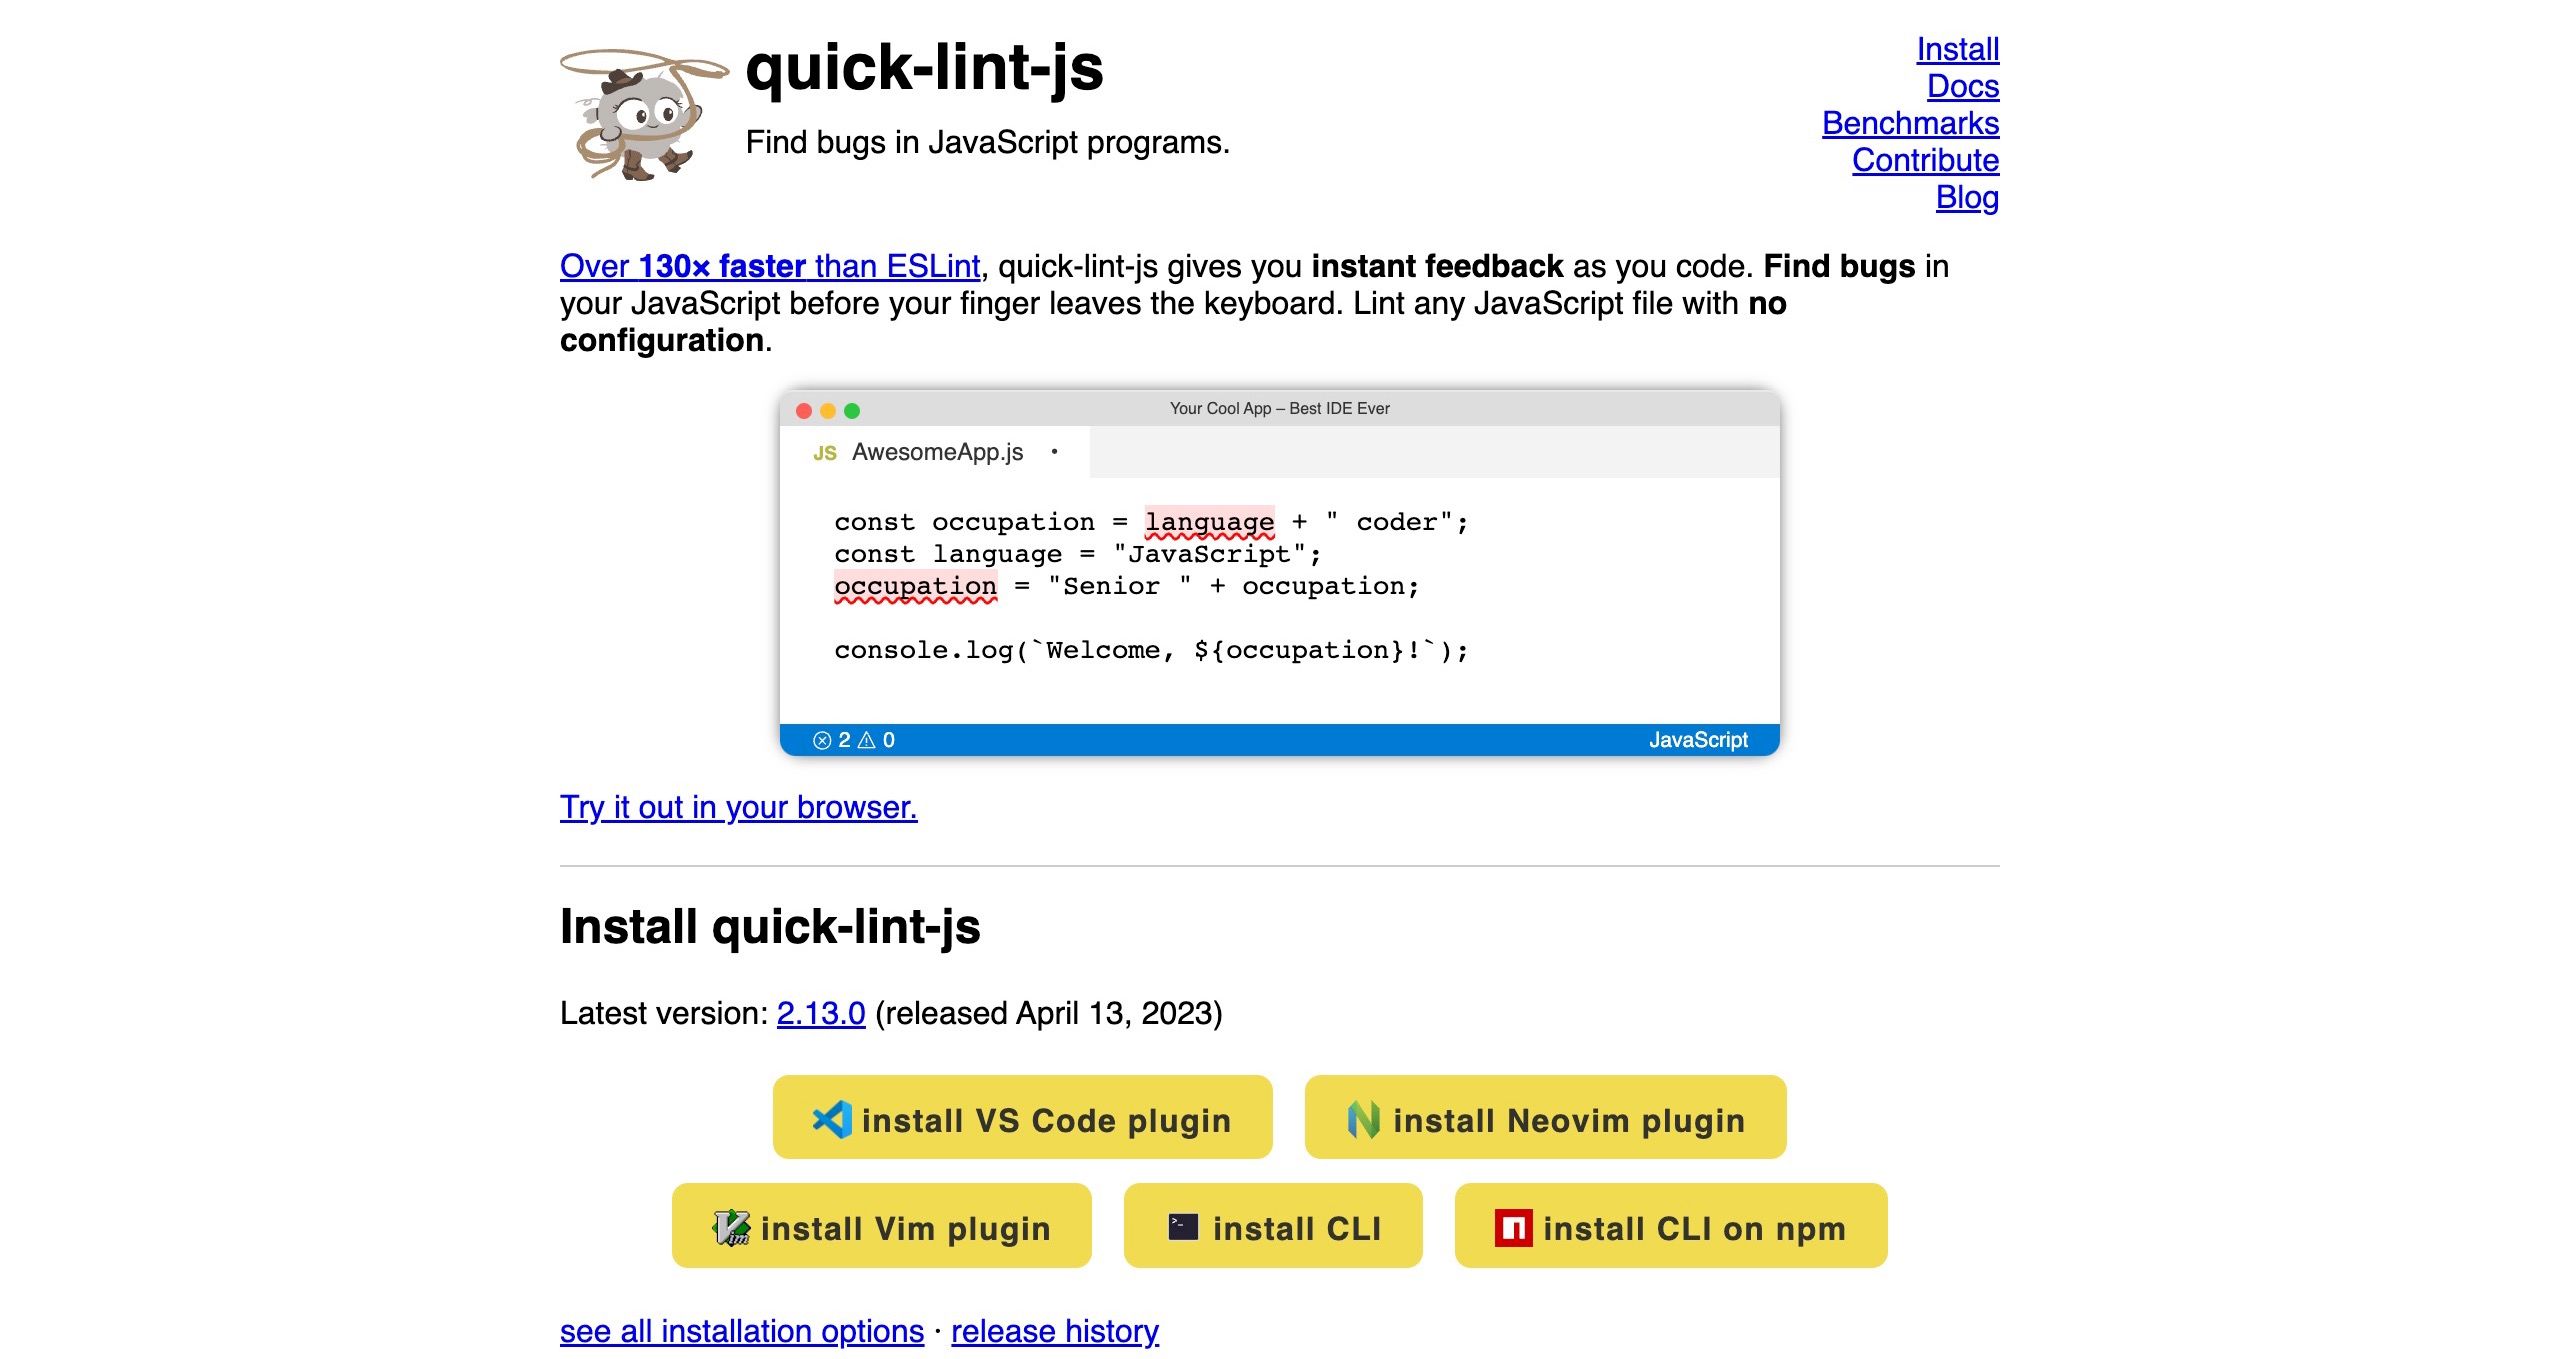 The quick-lint-js home page.